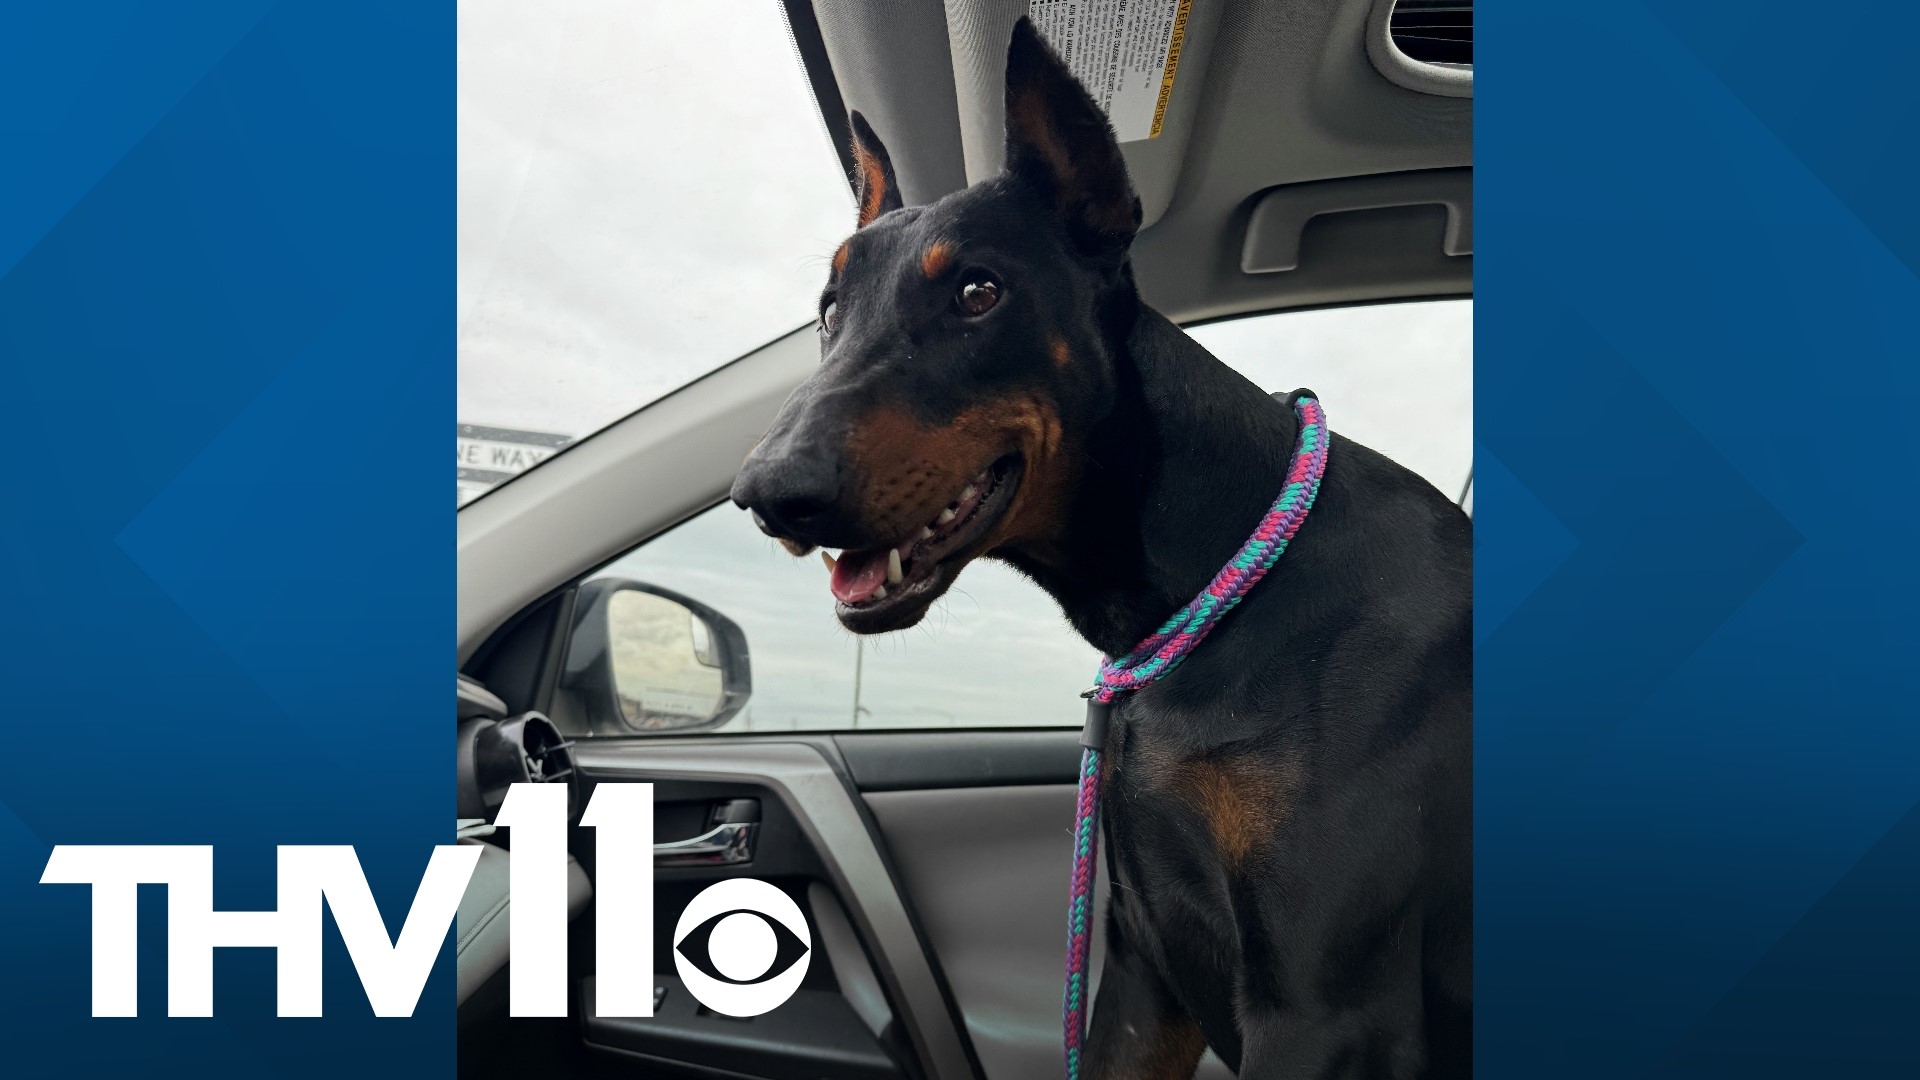 Meet Luna, a young Doberman who's great on a leash, house/kennel trained, sweet, and absolutely gorgeous! Adopt her now at the Little Rock Animal Village.